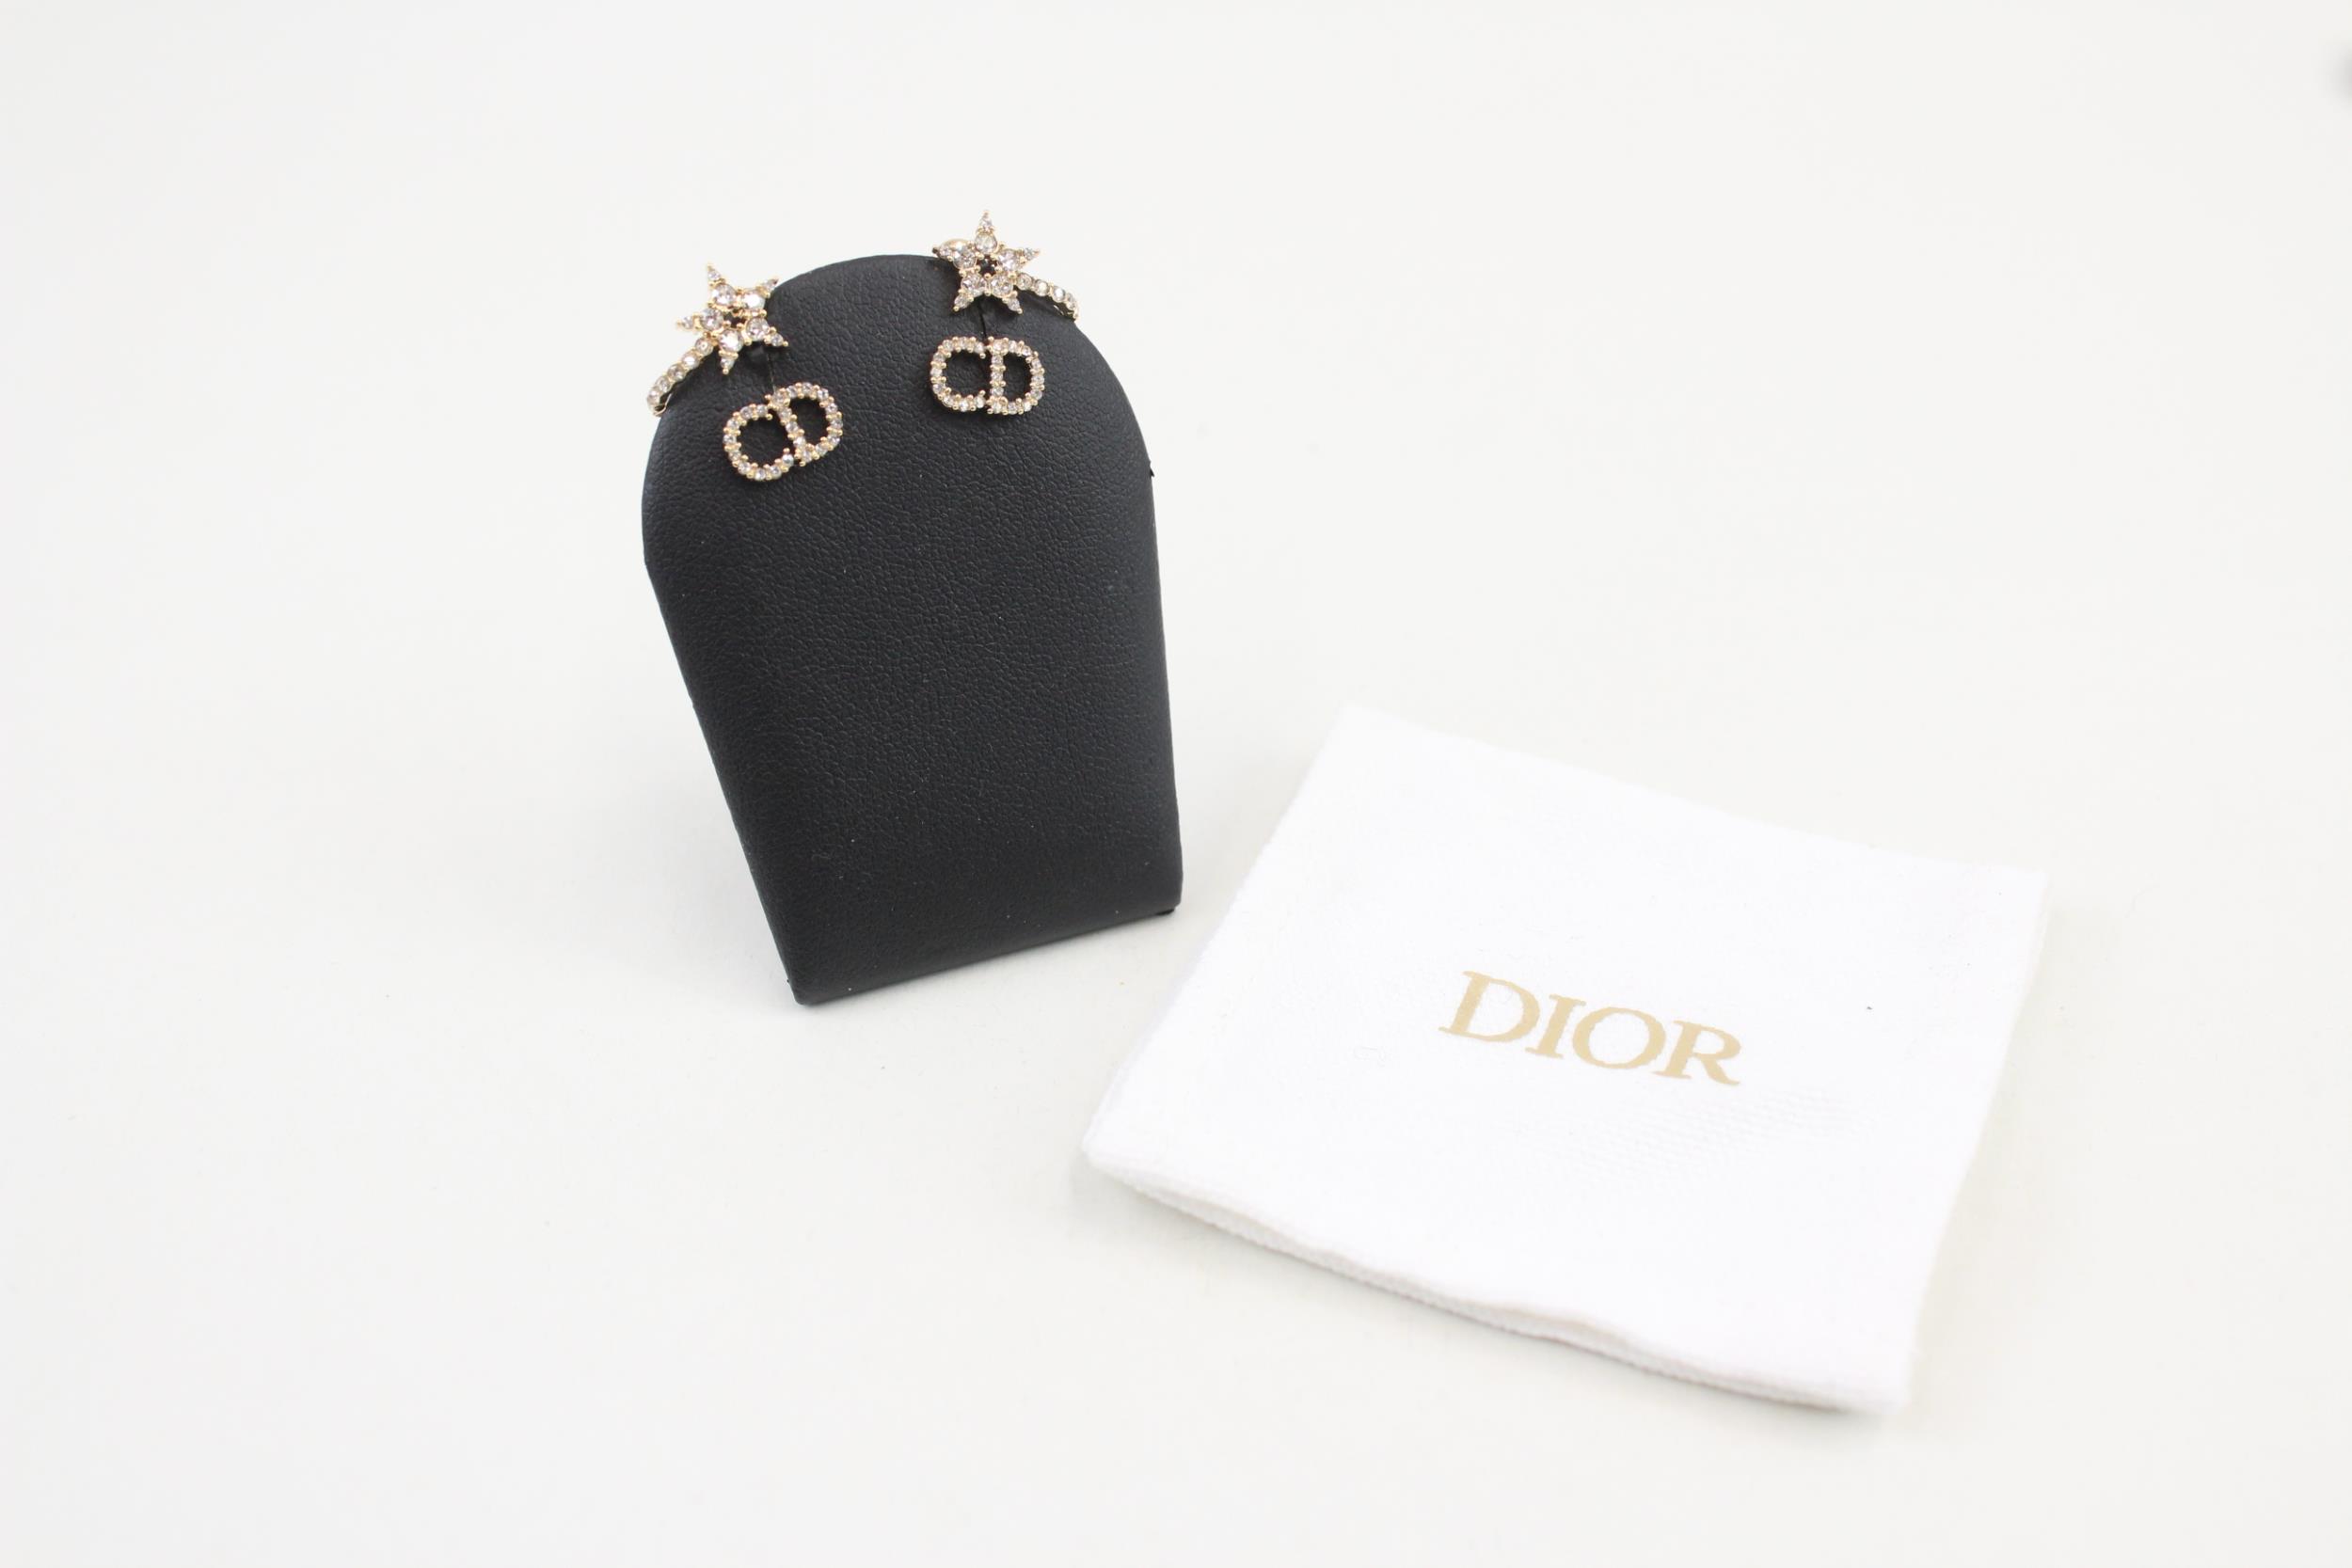 Pair of gold tone rhinestone earrings by designer Christian Dior with pouch (3g)